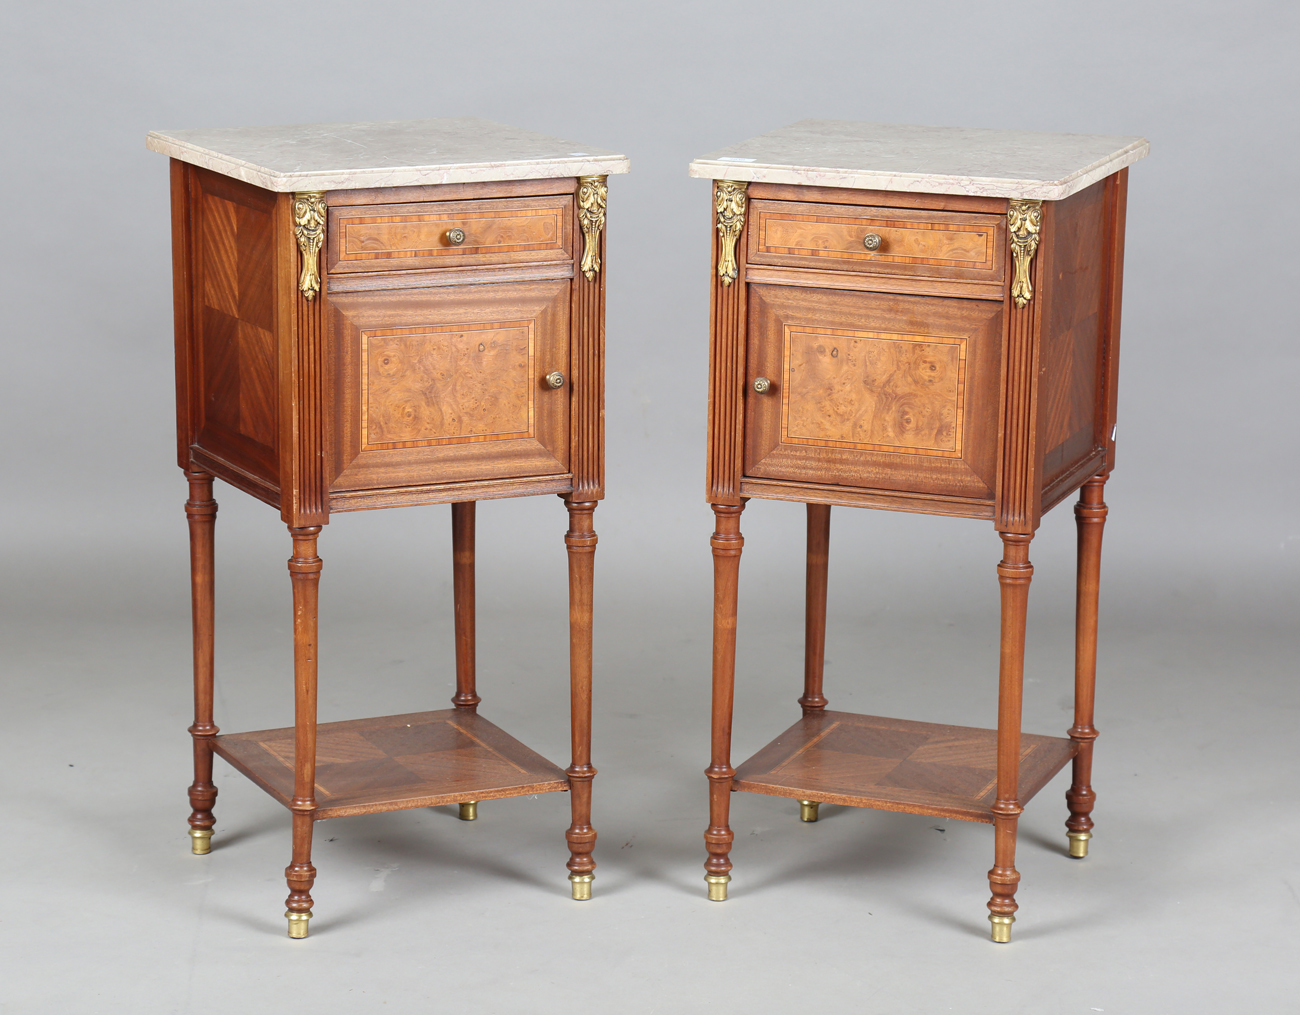 A pair of early 20th century French marble-topped bedside cabinets with ormolu mounts and ceramic-